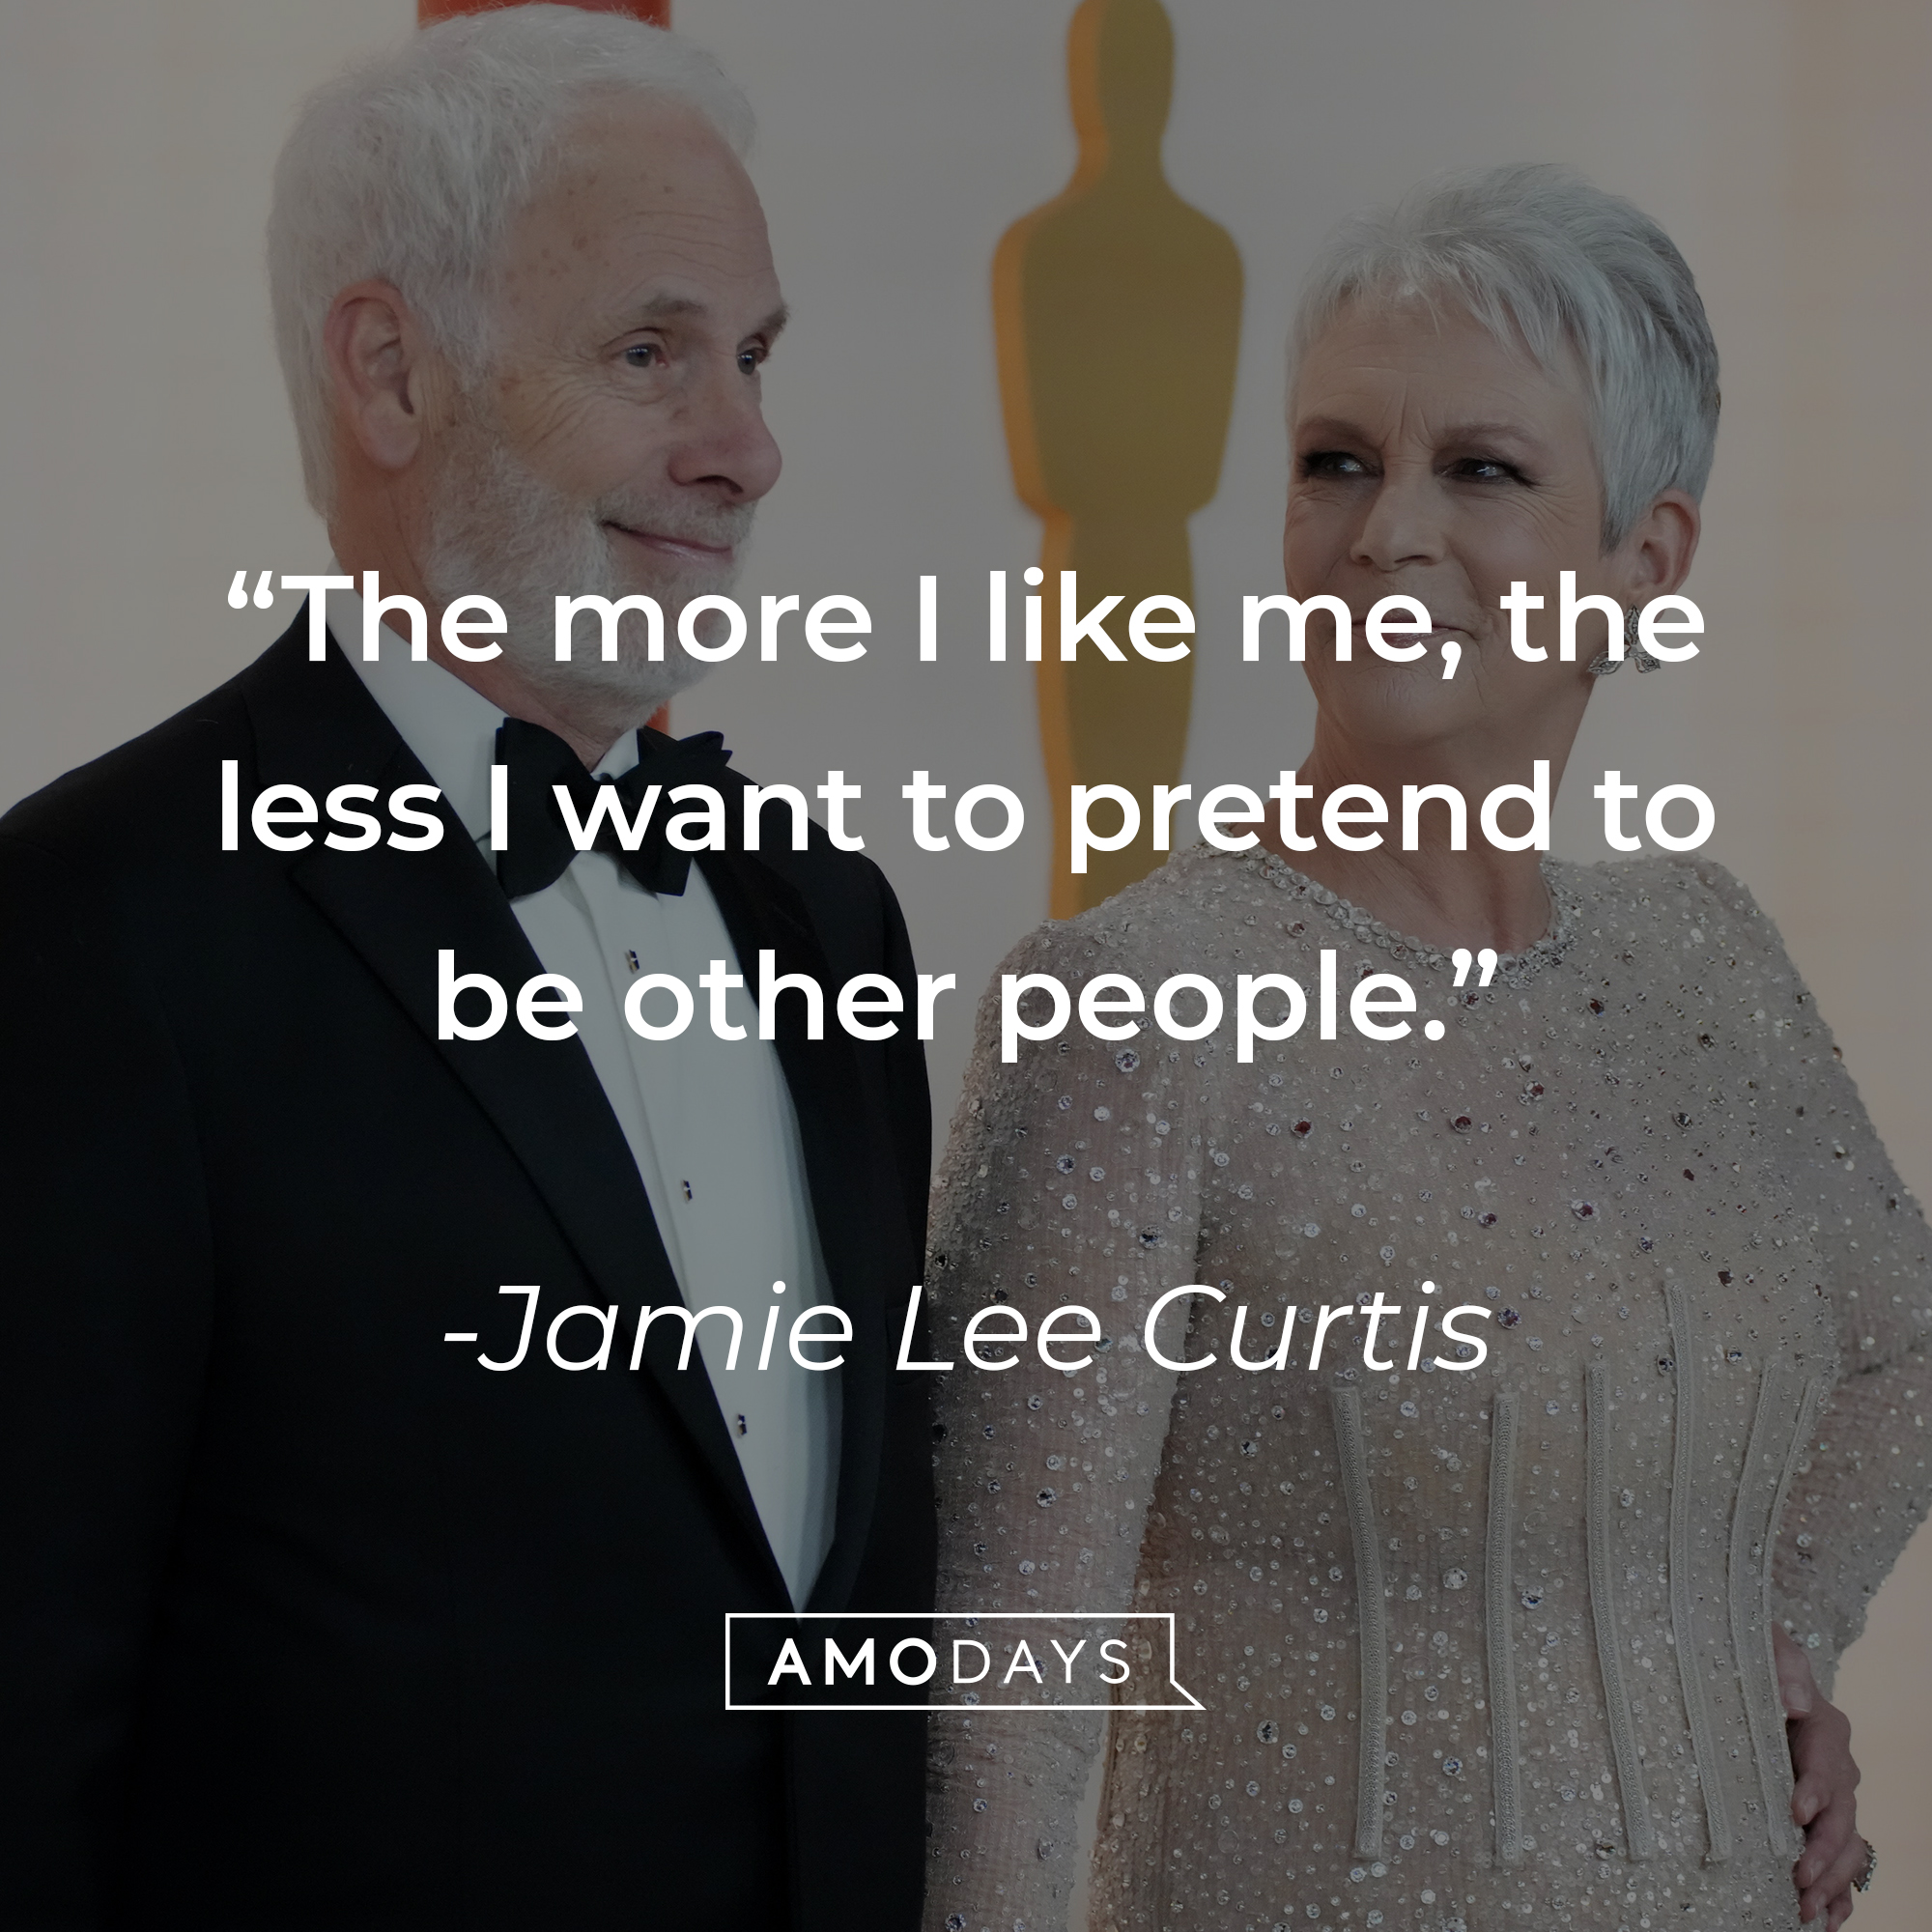 An image of Jamie Lee Curtis, with her quote: “The more I like me, the less I want to pretend to be other people.”  | Source: Getty Images